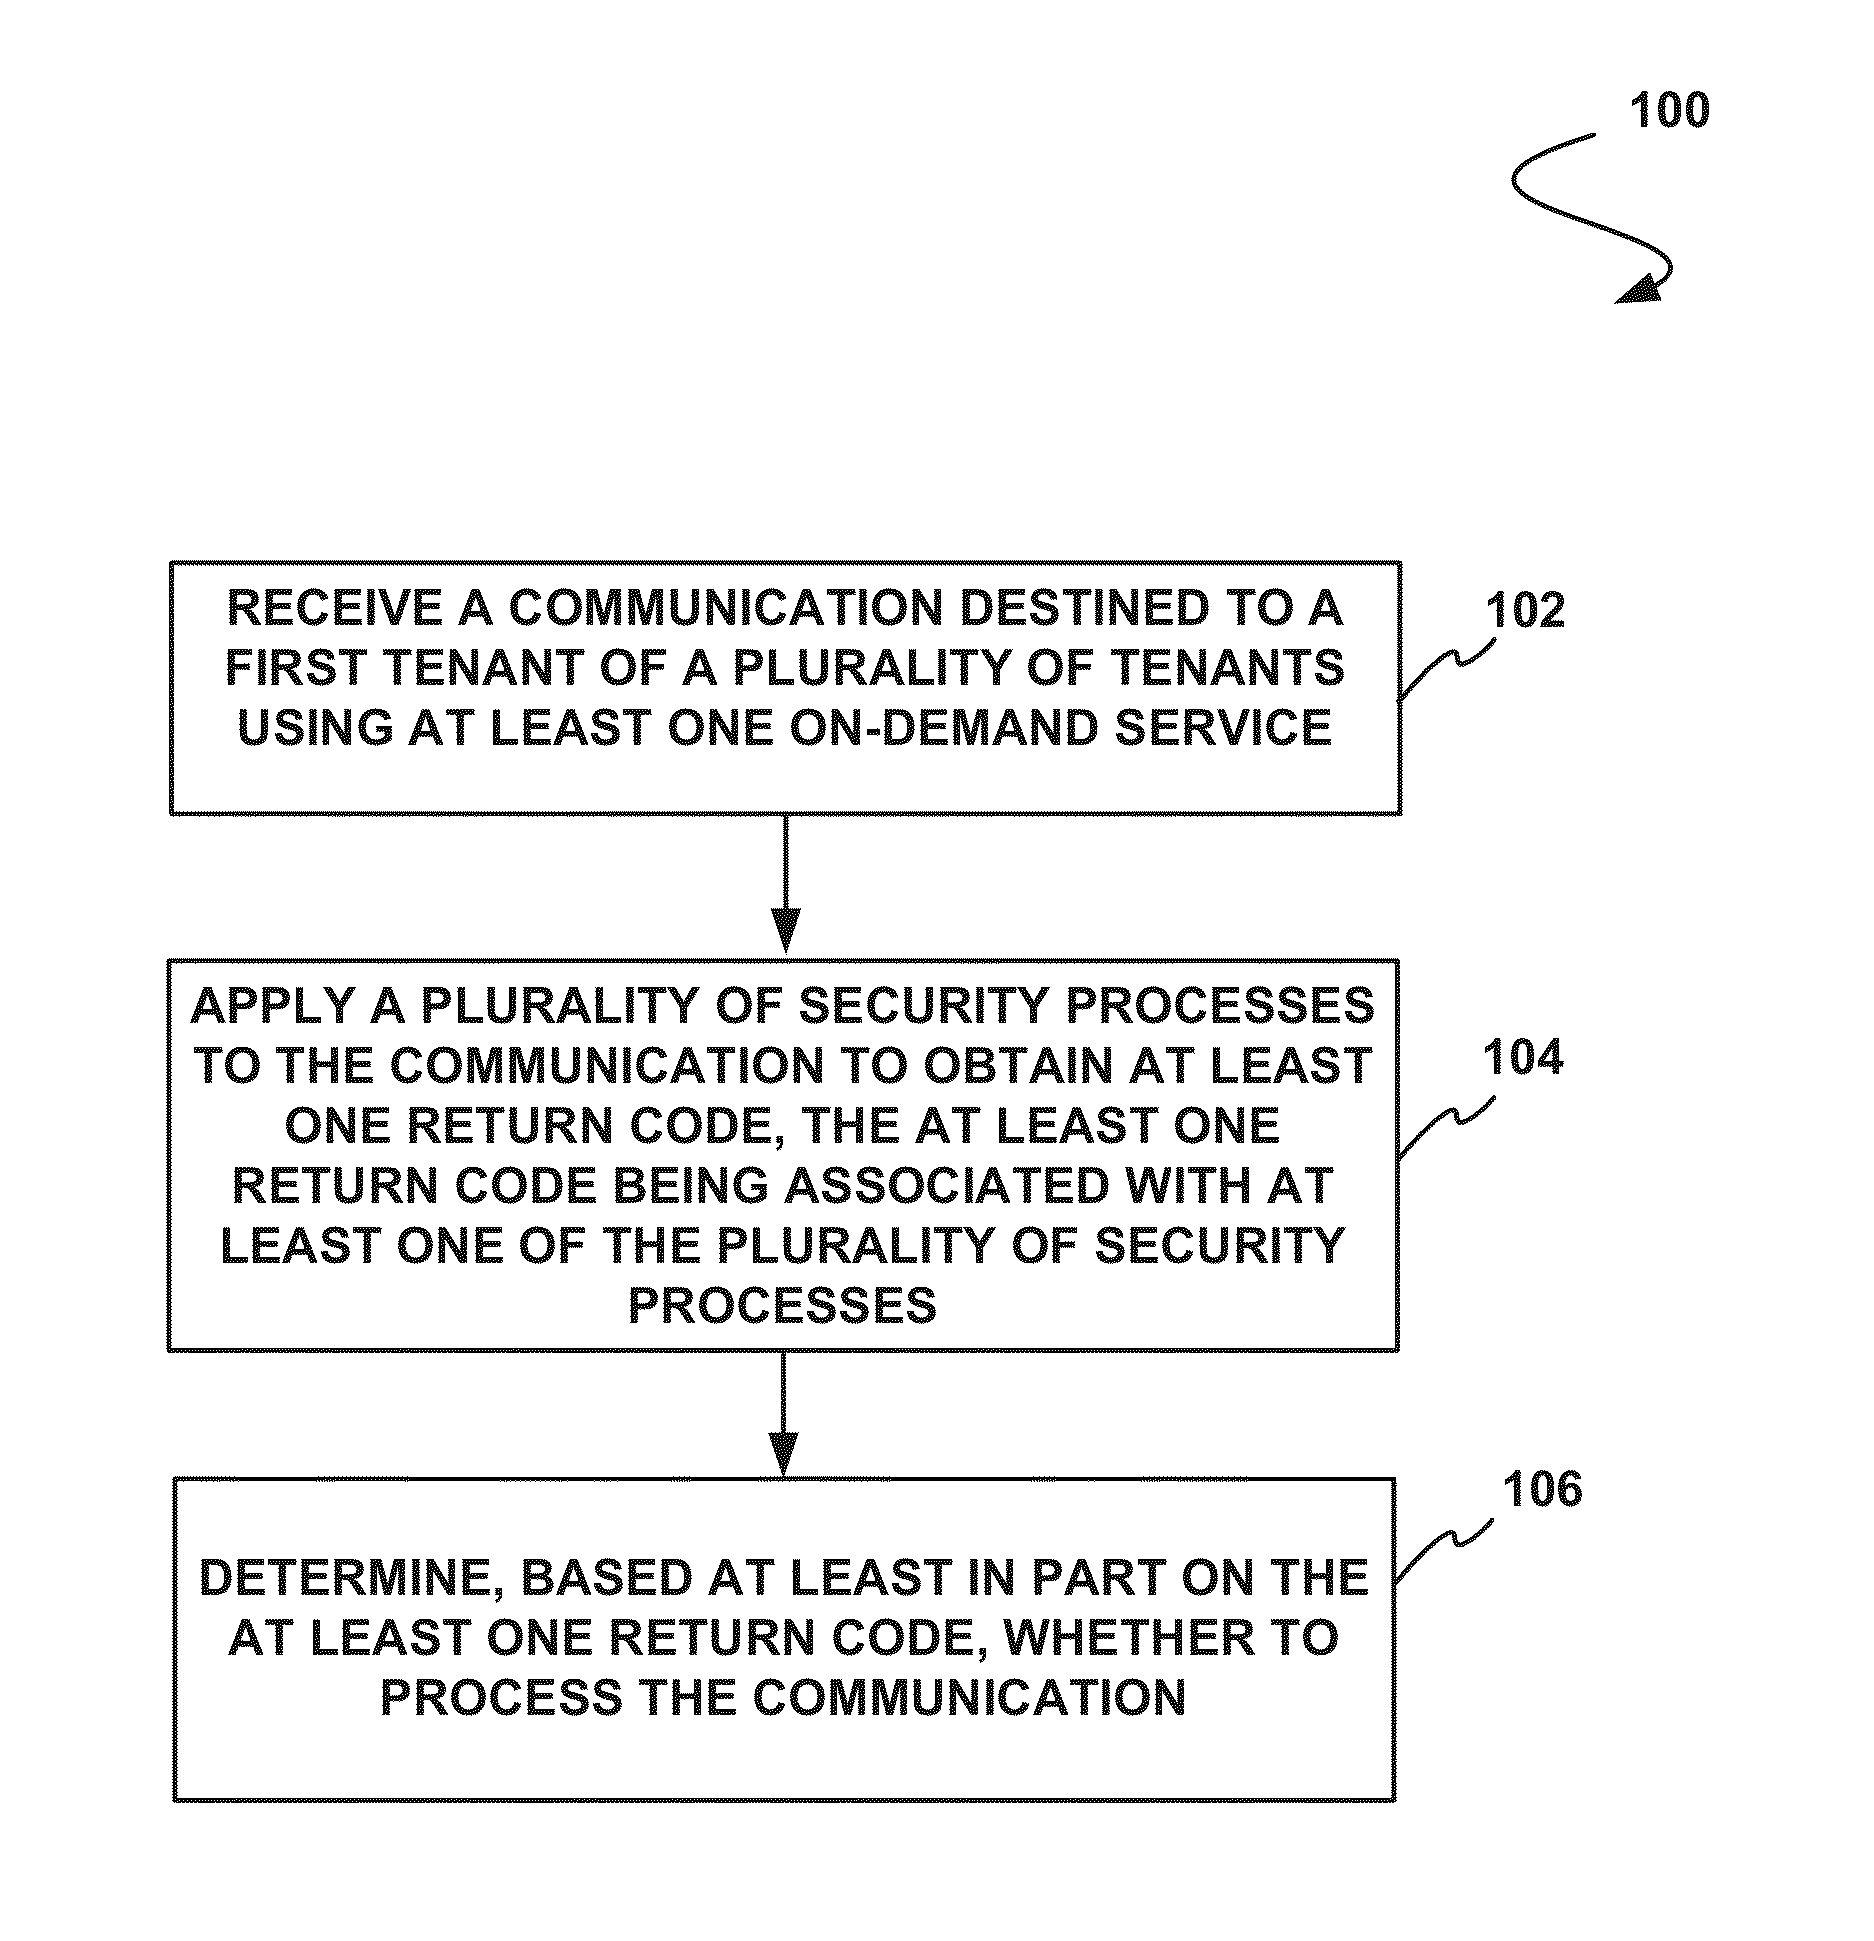 System, method, and computer program product for security verification of communications to tenants of an on-demand database service